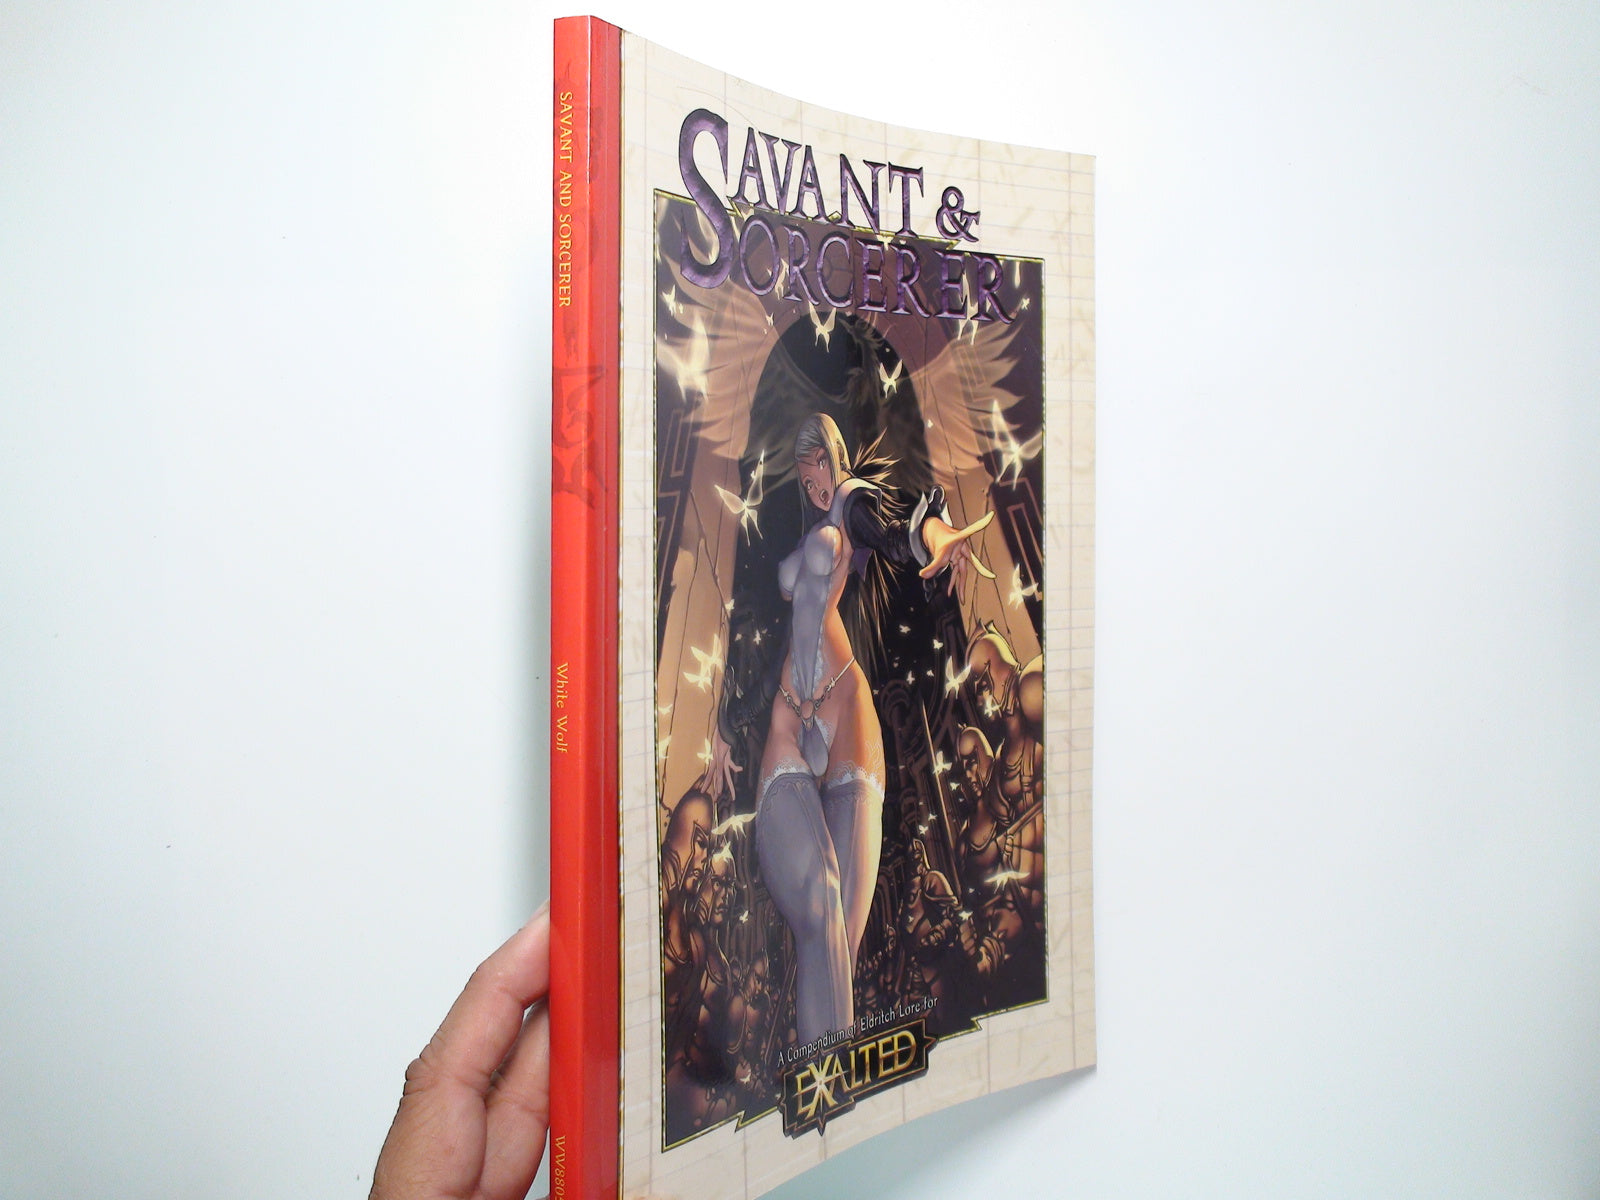 Savant and Sorcerer, Exalted, White Wolf, 1st Ed, RPG, WW8805, 2004